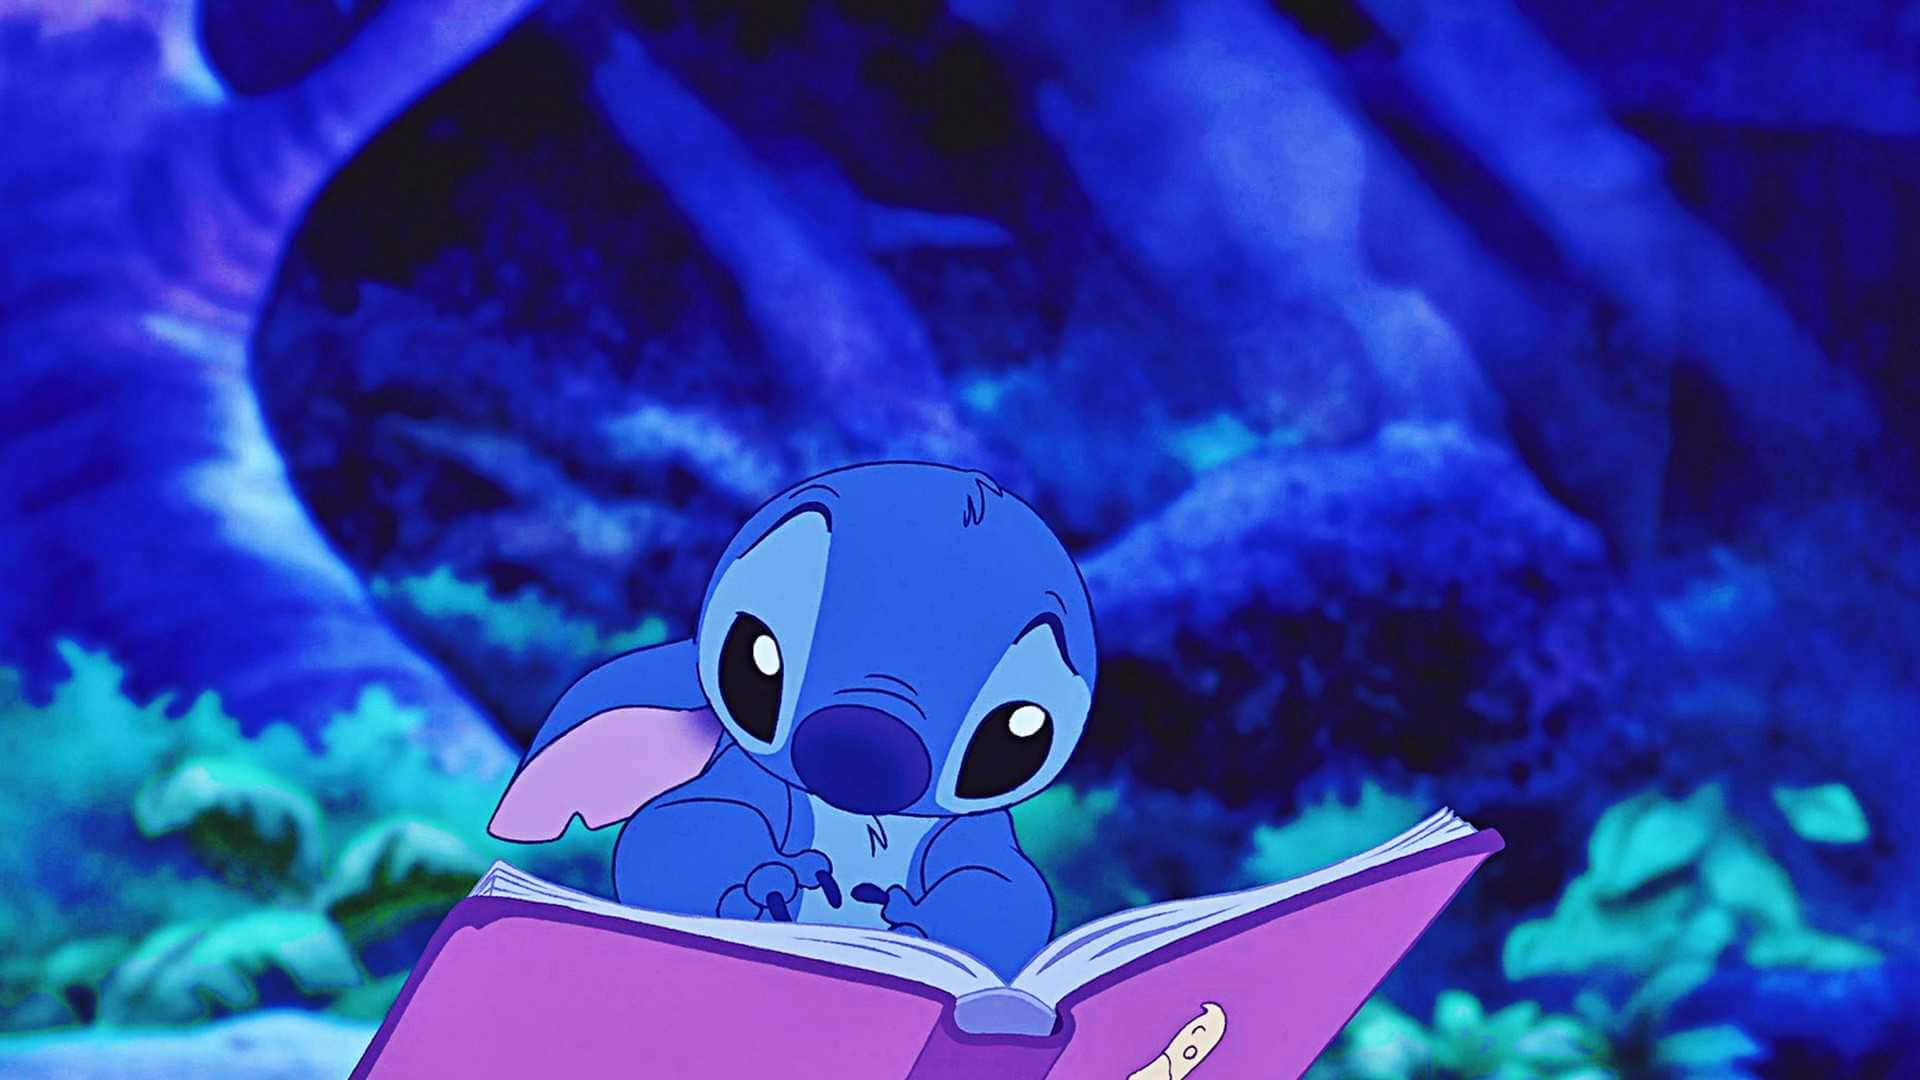 STITCH aesthetic wallpapers edit  YouTube